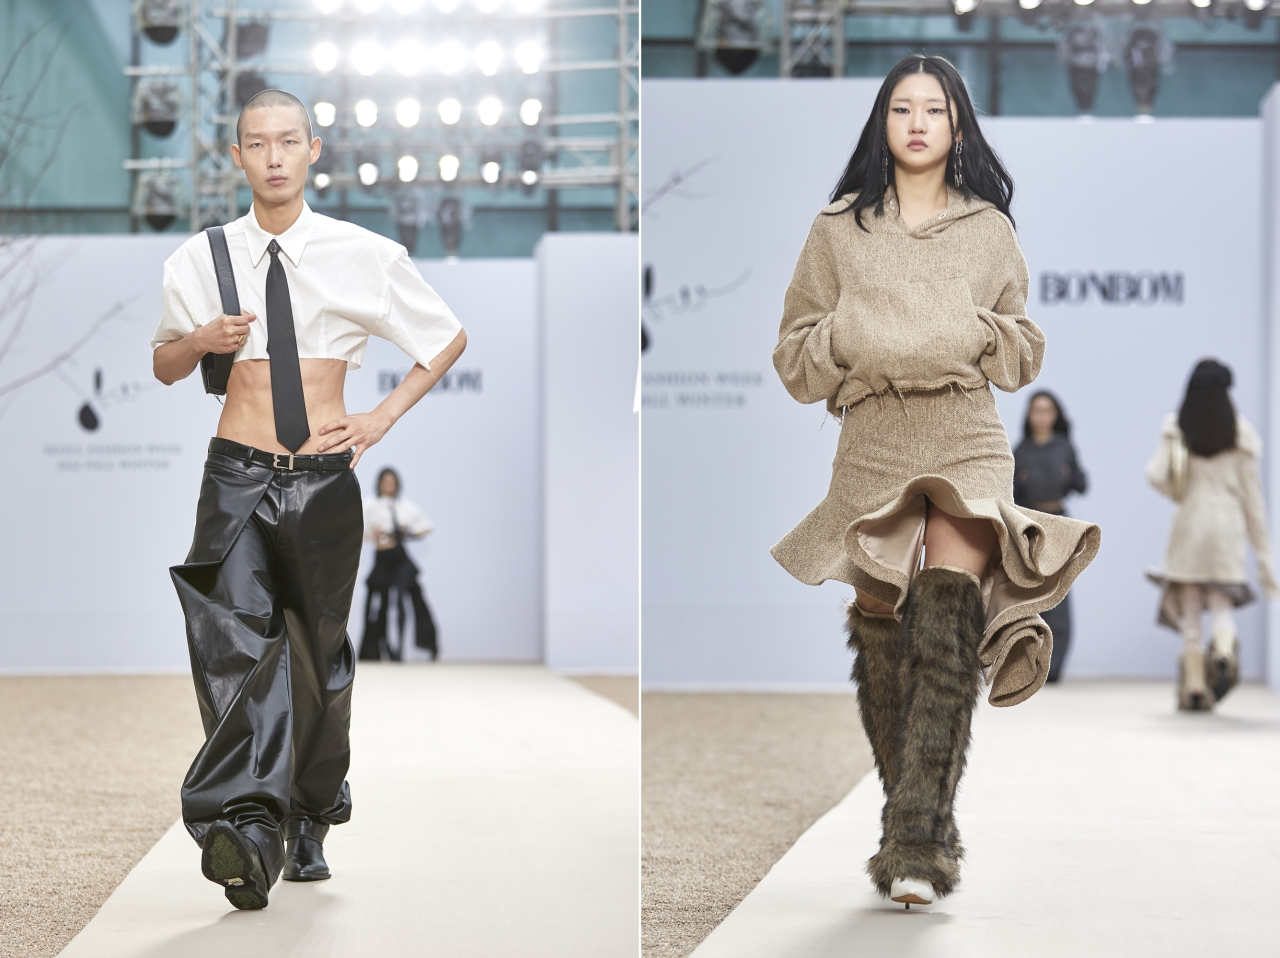 Looks from Bonbom’s 2022 fall-winter collection are presented at Seoul Fashion Week held at the Seoul Museum of Craft Art in central Seoul on Friday. (Seoul Fashion Week)